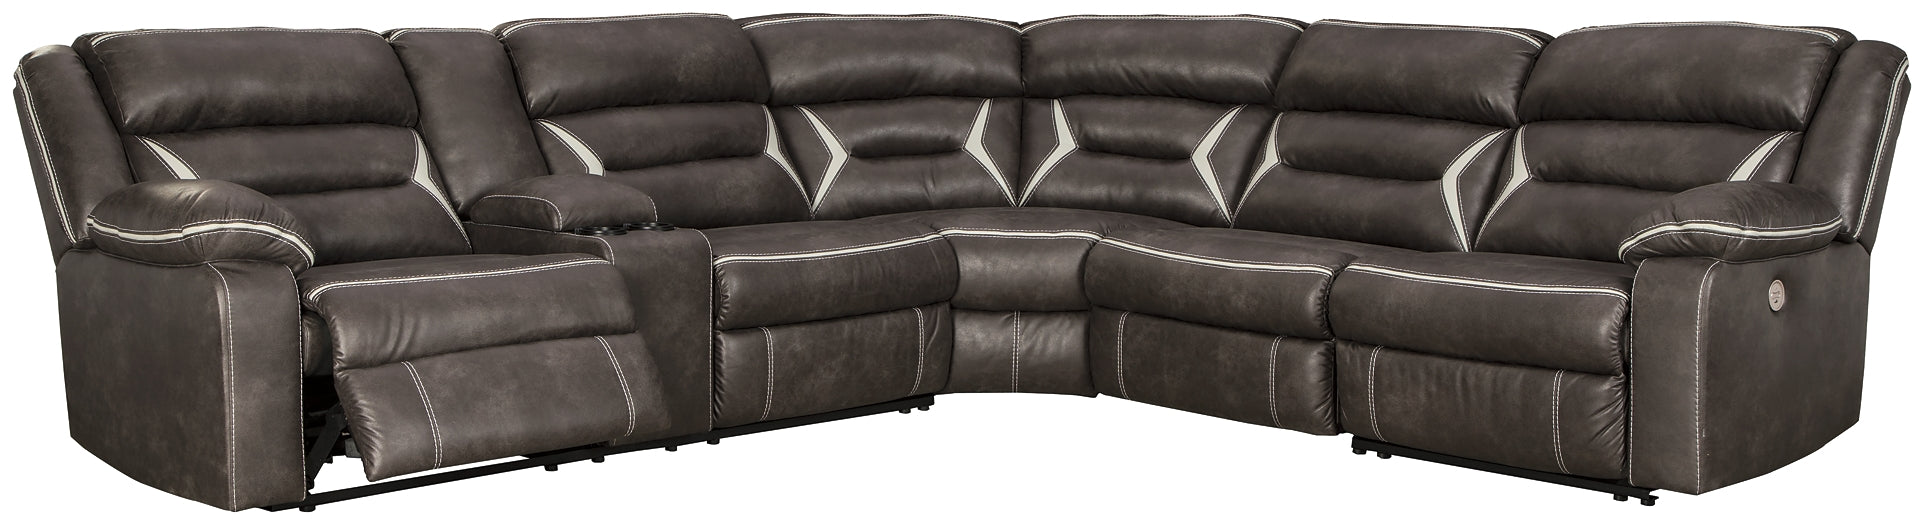 Kincord 4-Piece Power Reclining Sectional Rent Wise Rent To Own Jacksonville, Florida